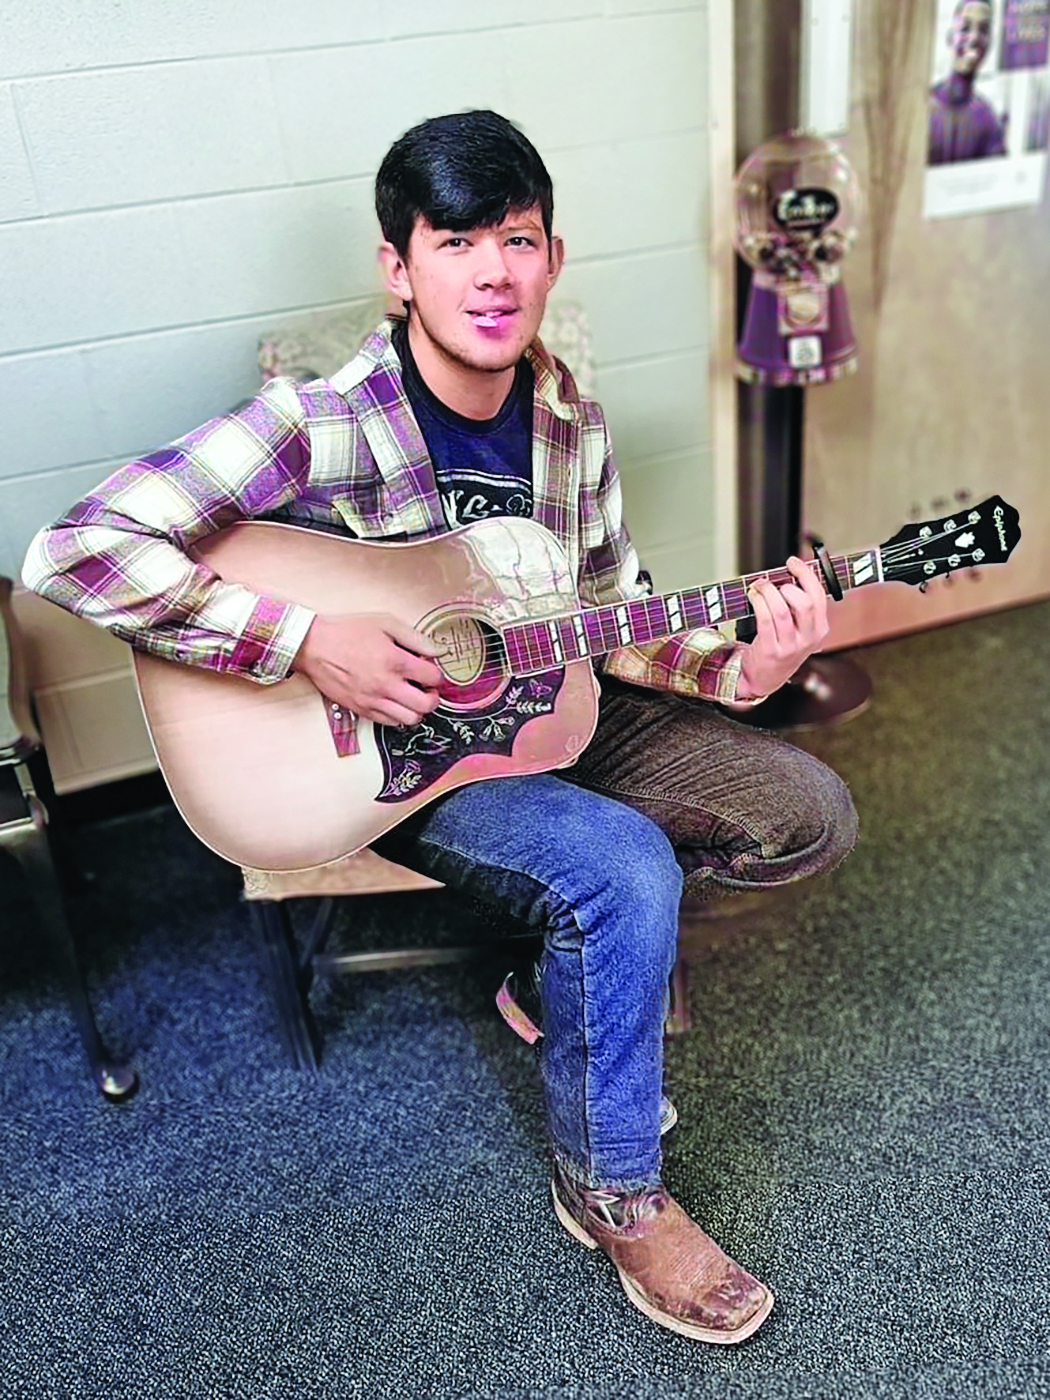 One Young Teen Overcomes Adversity and Finds Passion Through Music